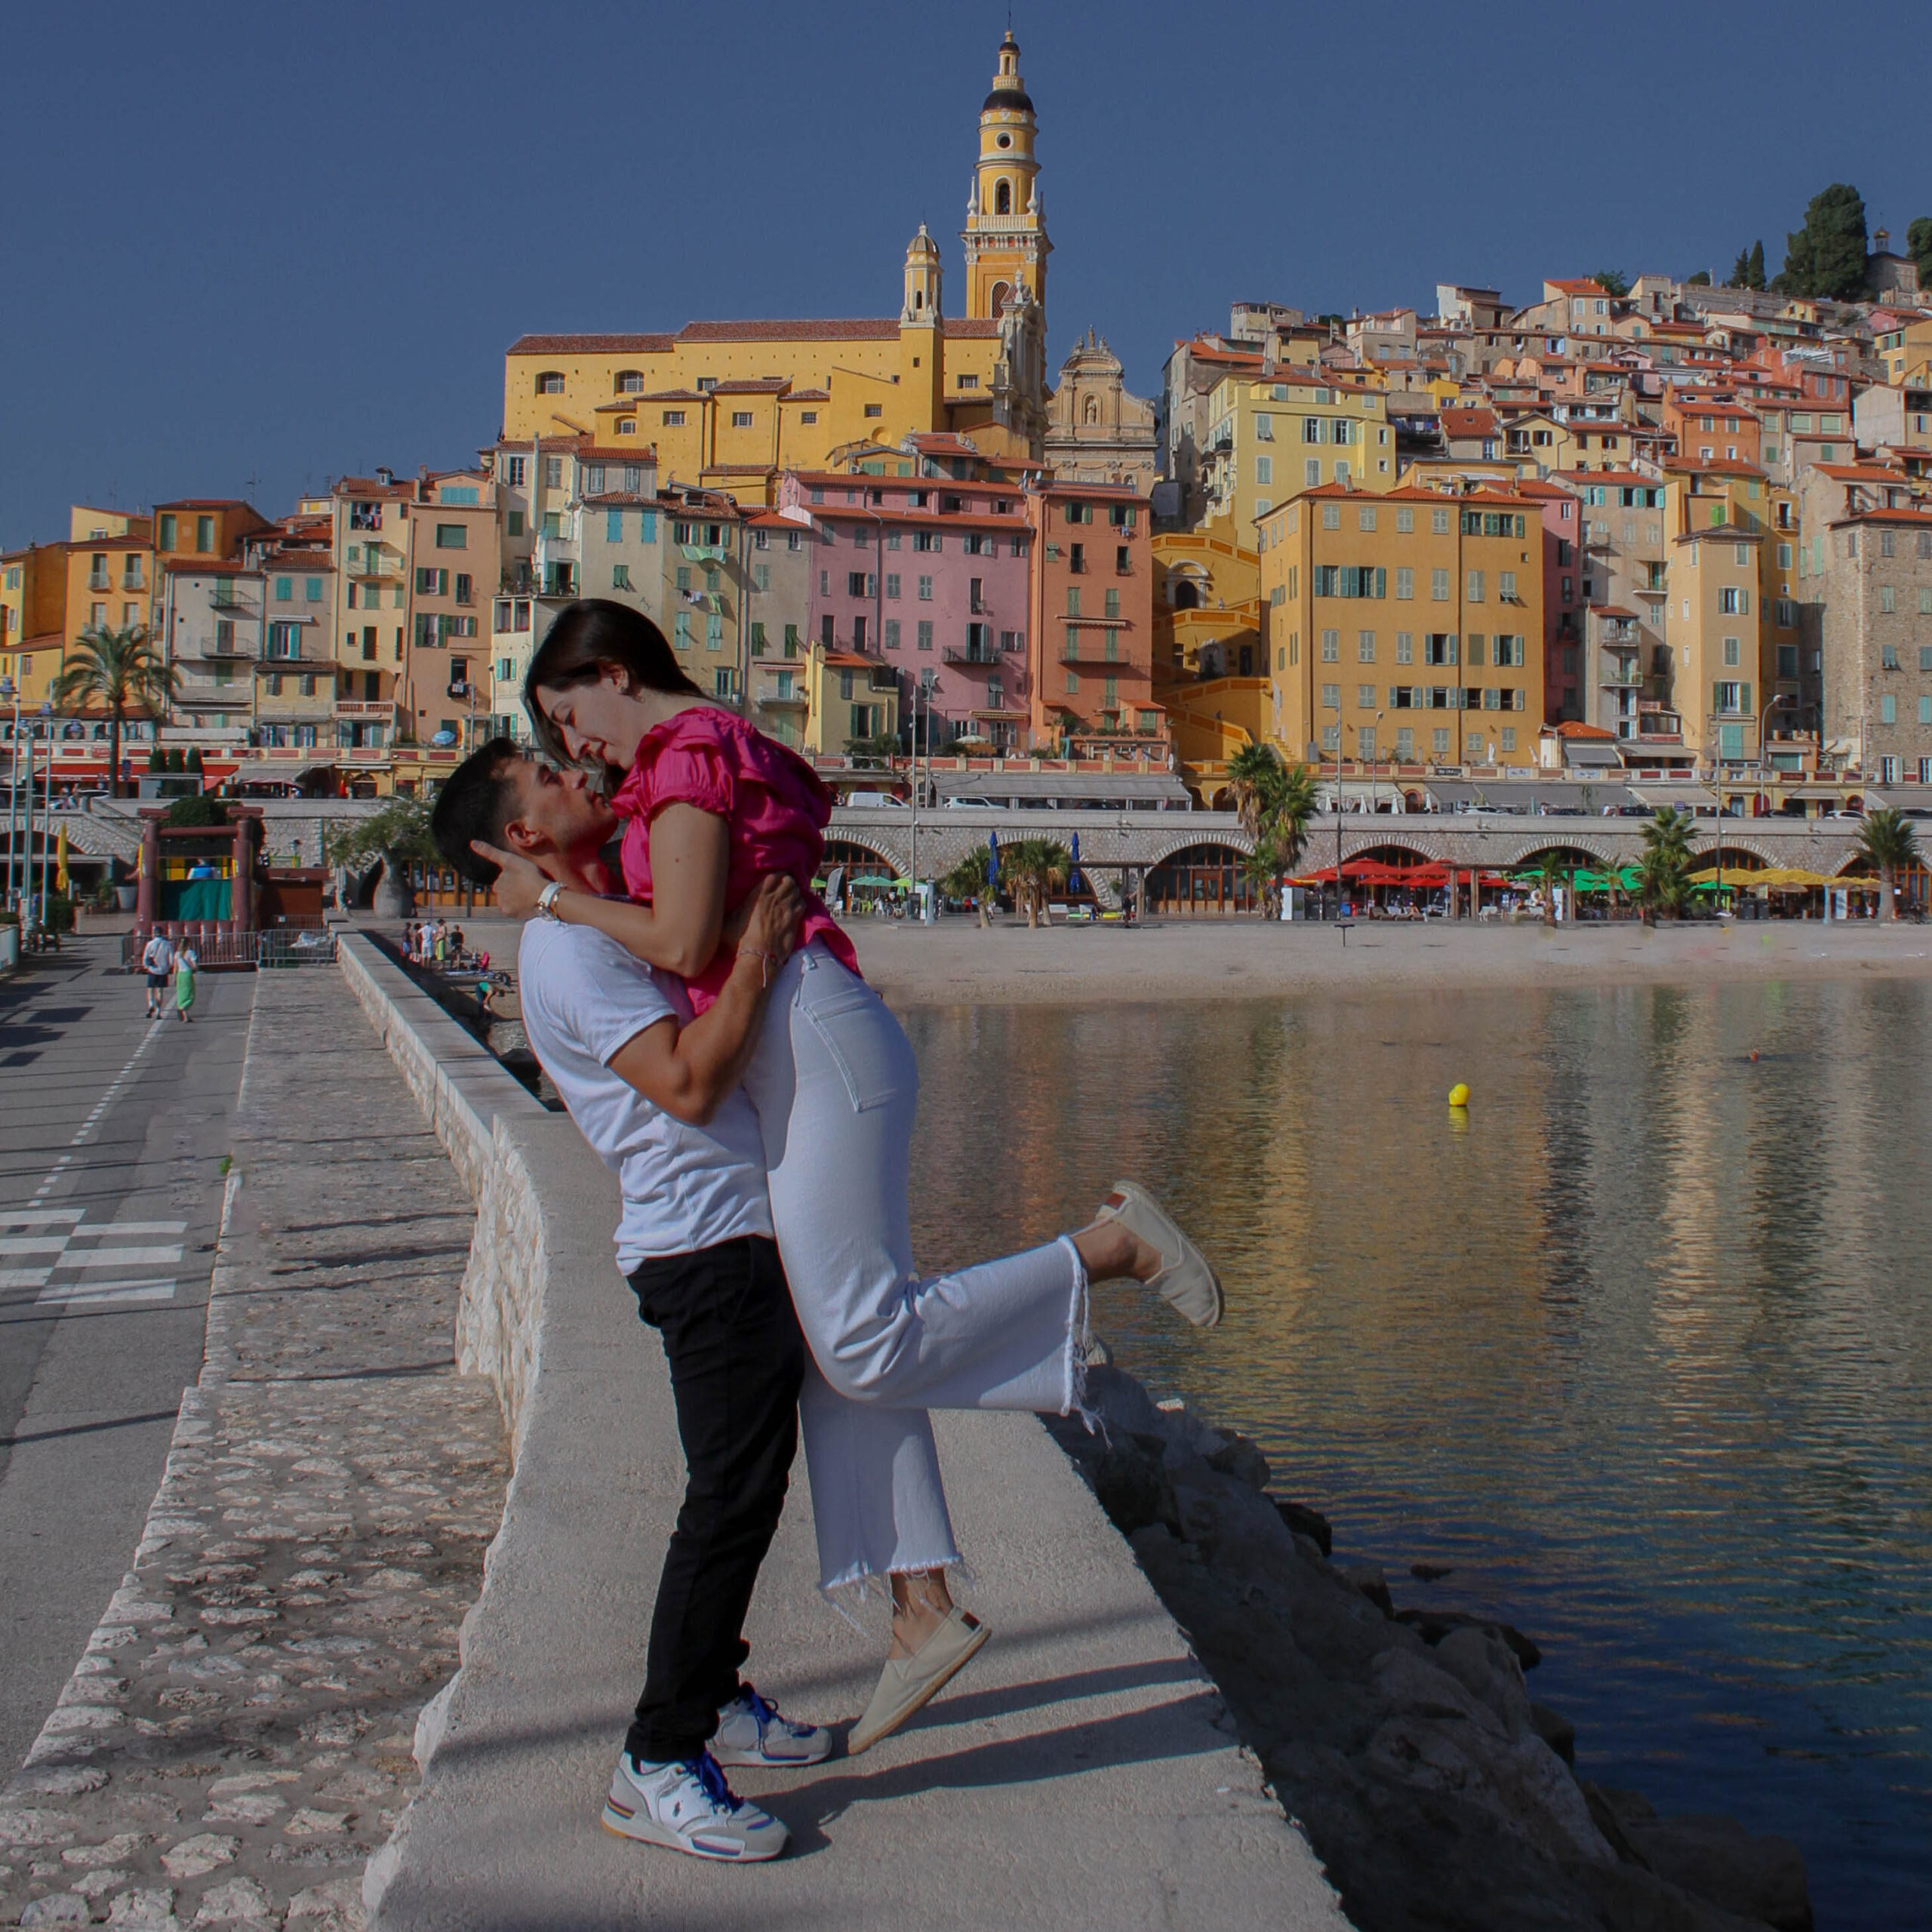 Menton : A Hidden Gem of the Famous French Riviera